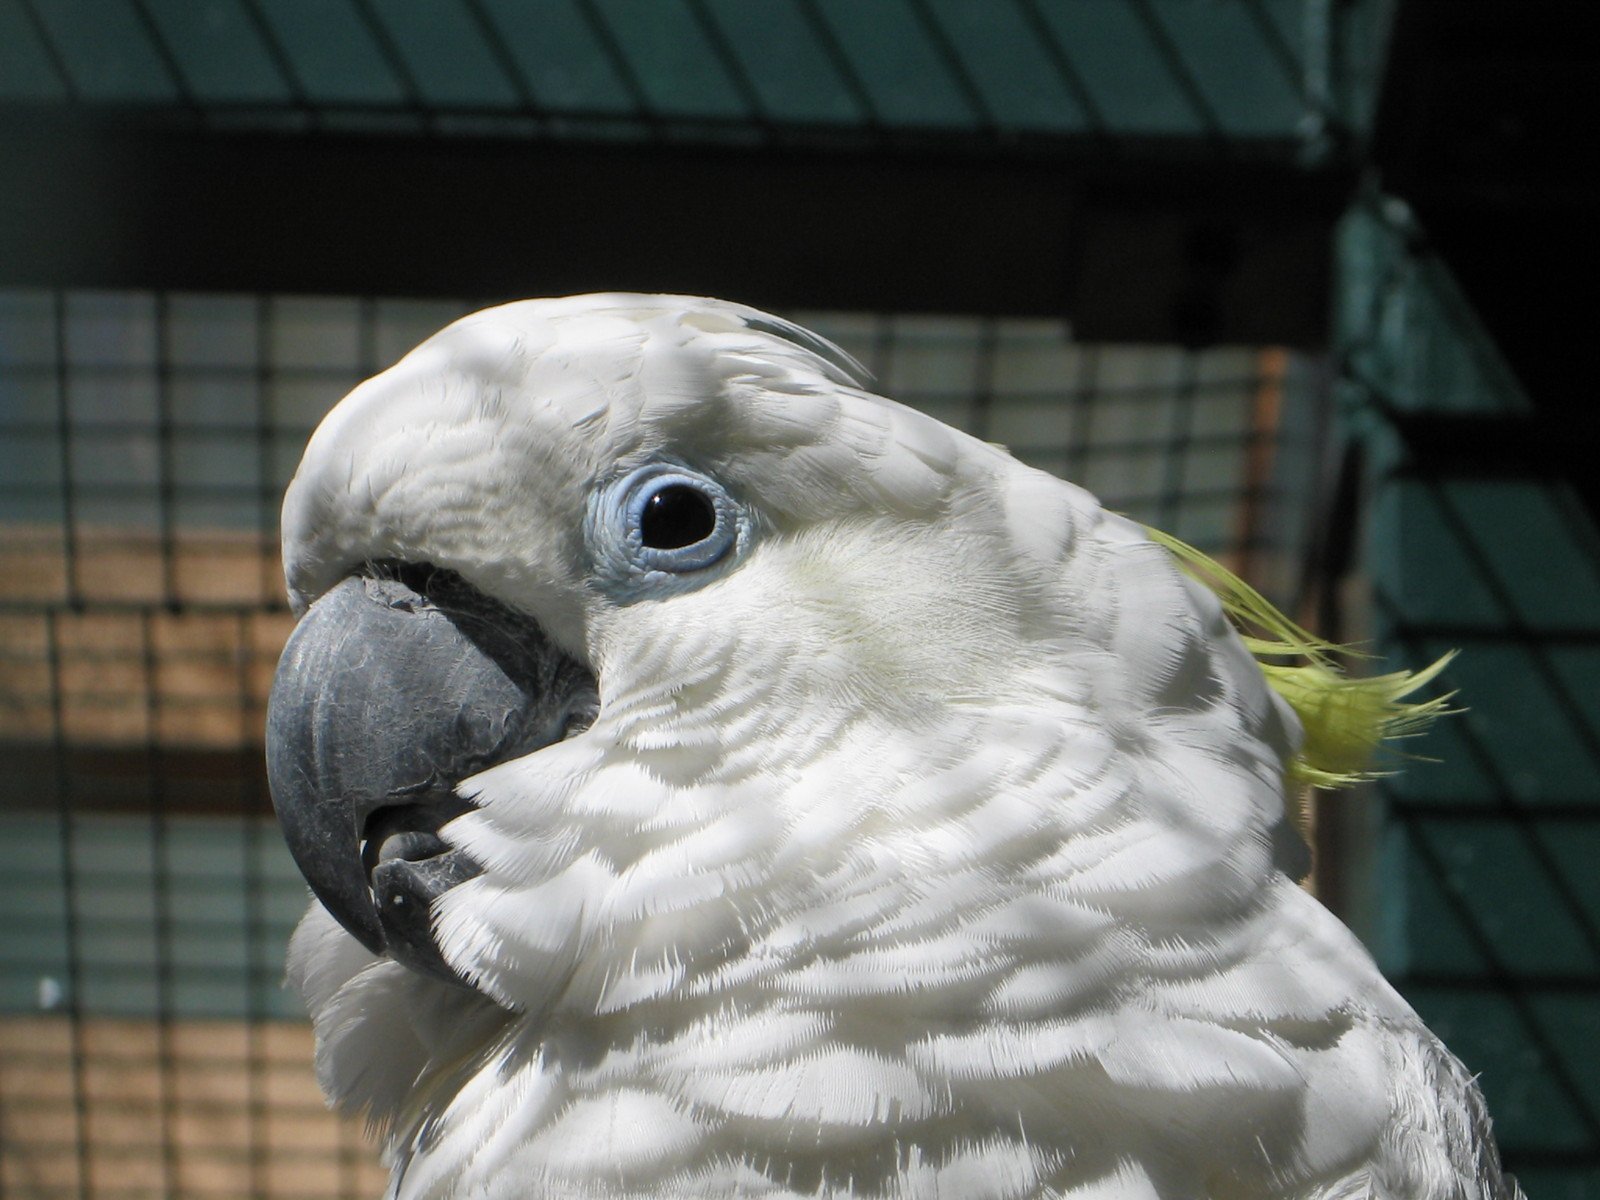 a white cockatoo is sitting outside with its eyes opened